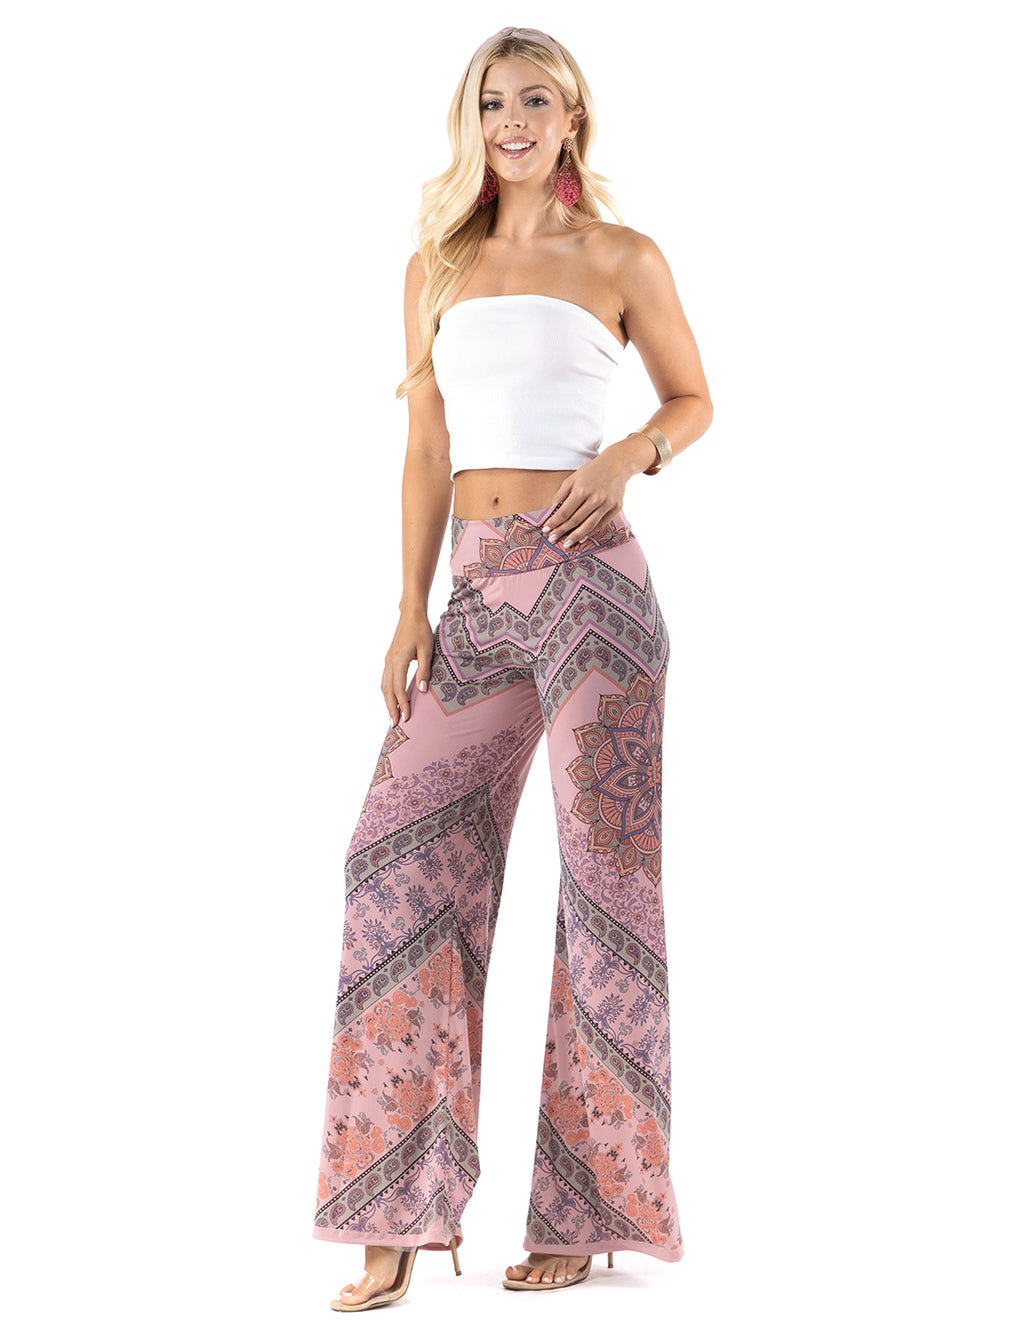 Pink Mandela Paisley High waist palazzo pants featuring pockets, wide legs, and a comfortable stretchy fabric Perfect during spring, summer,Concerts, Festivals, Dance, Brunch